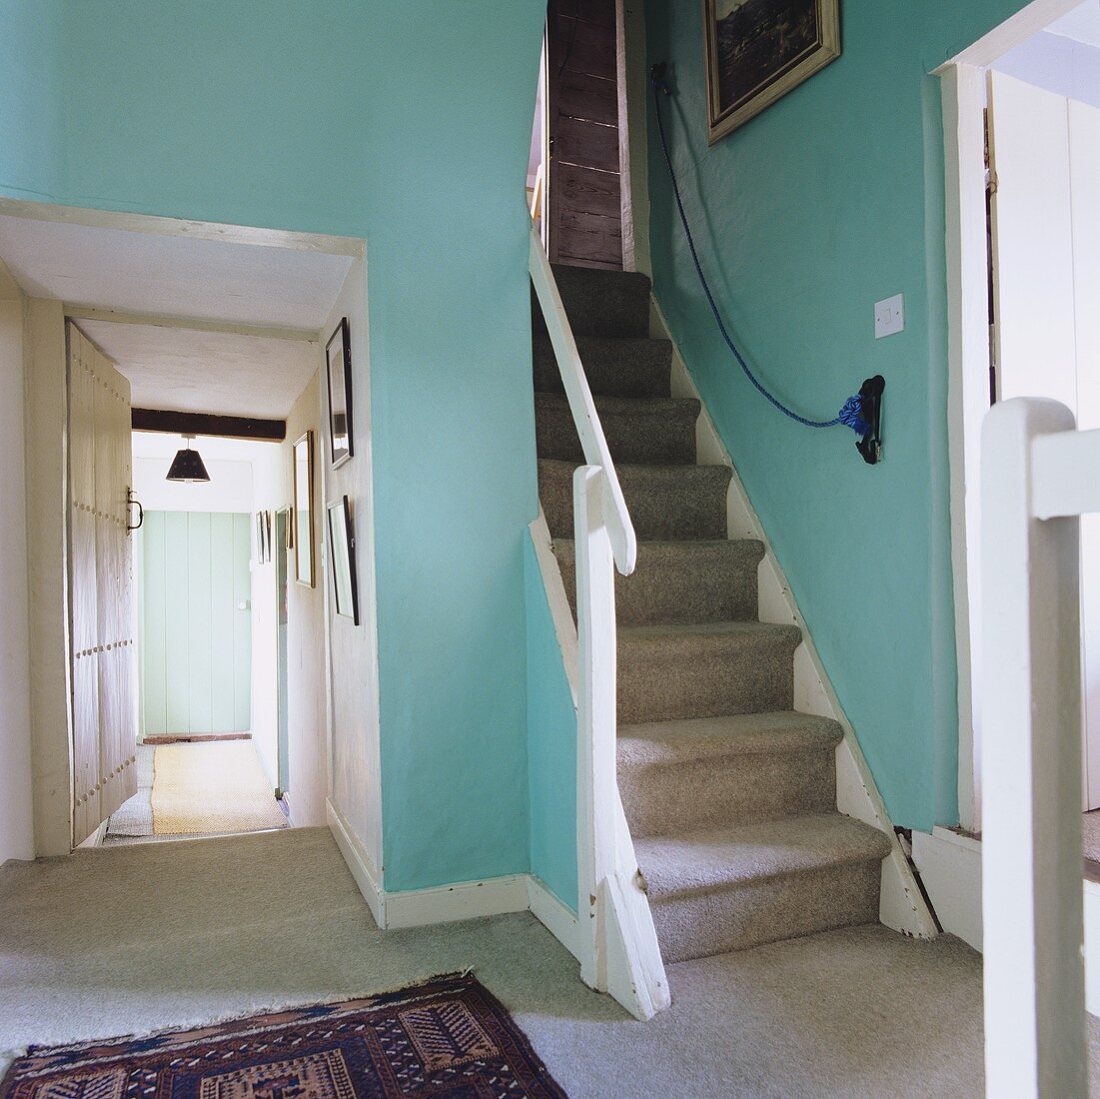 A simple stairway with turquoise-coloured walls and a grey carpet on the floor and stairs with a view of a hallway